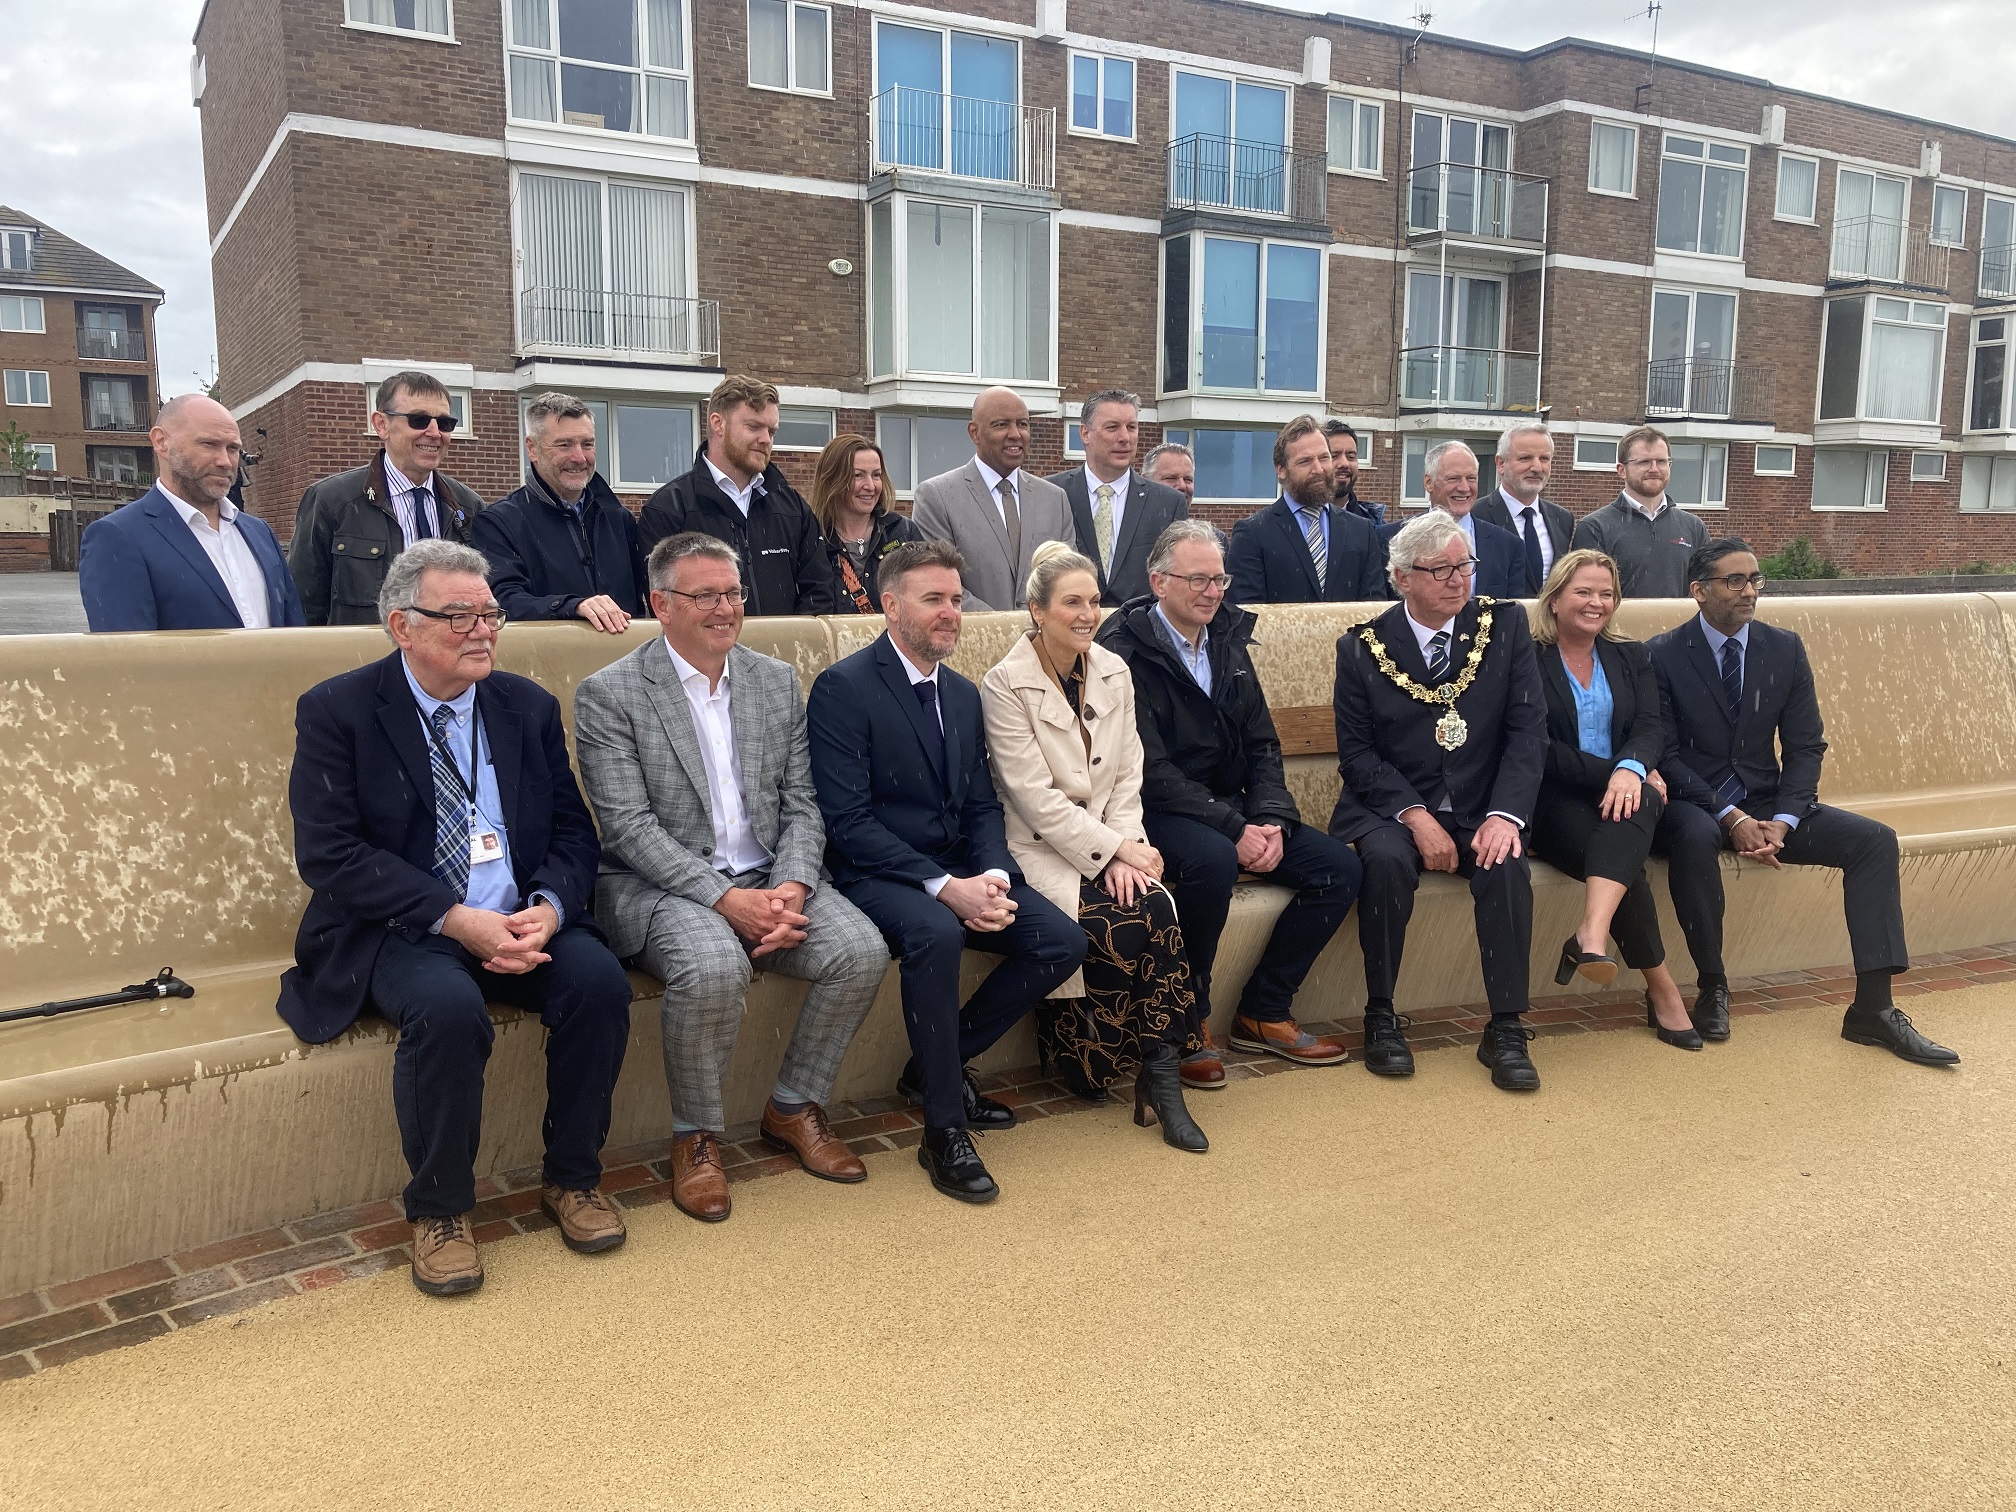 Opening ceremony for new promenade flood defence scheme